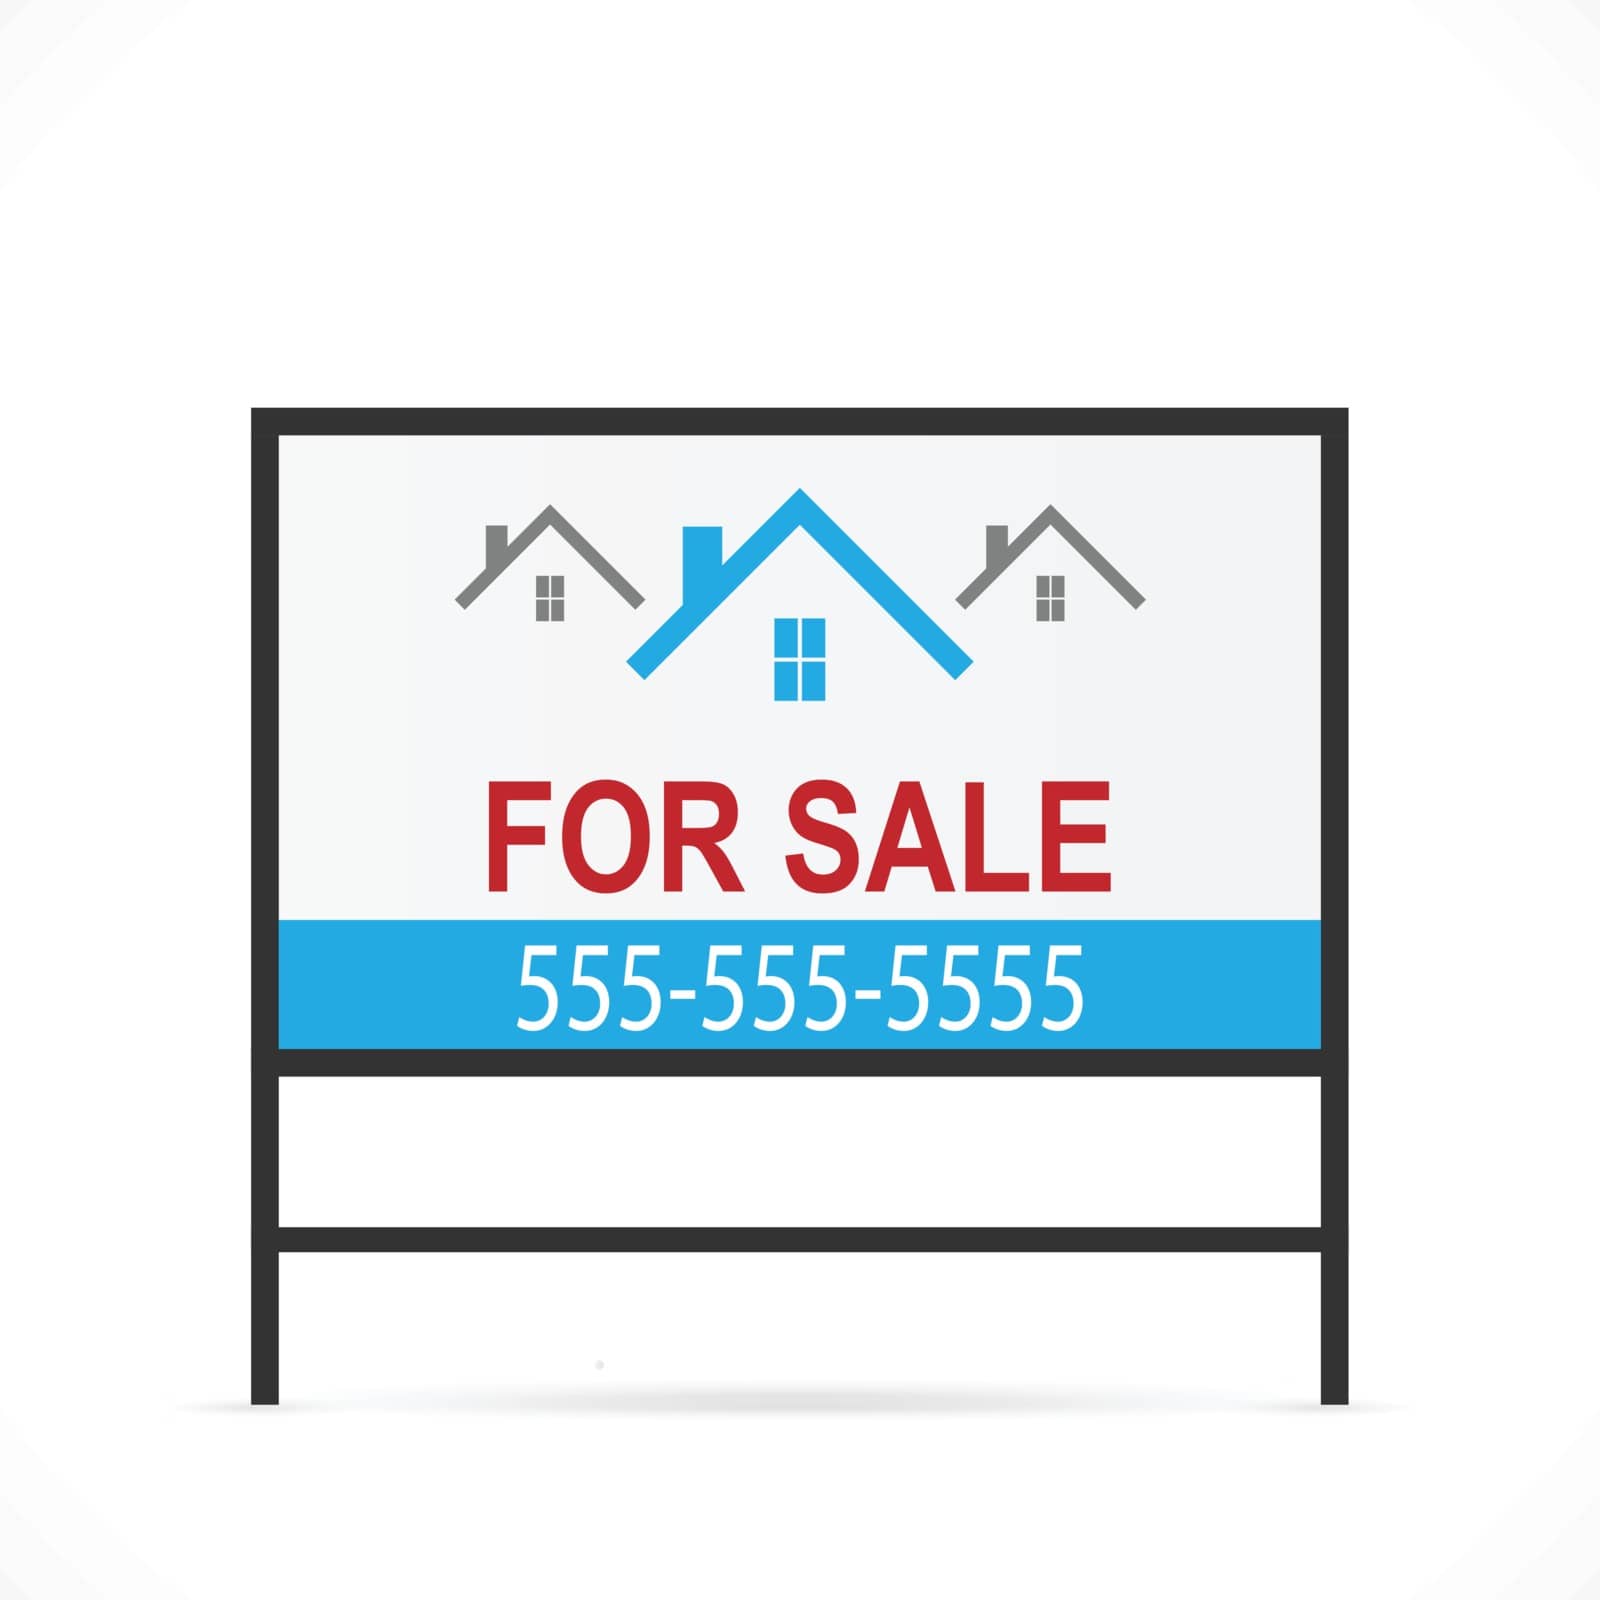 Illustration of a real estate for sale sign isolated on a white background.